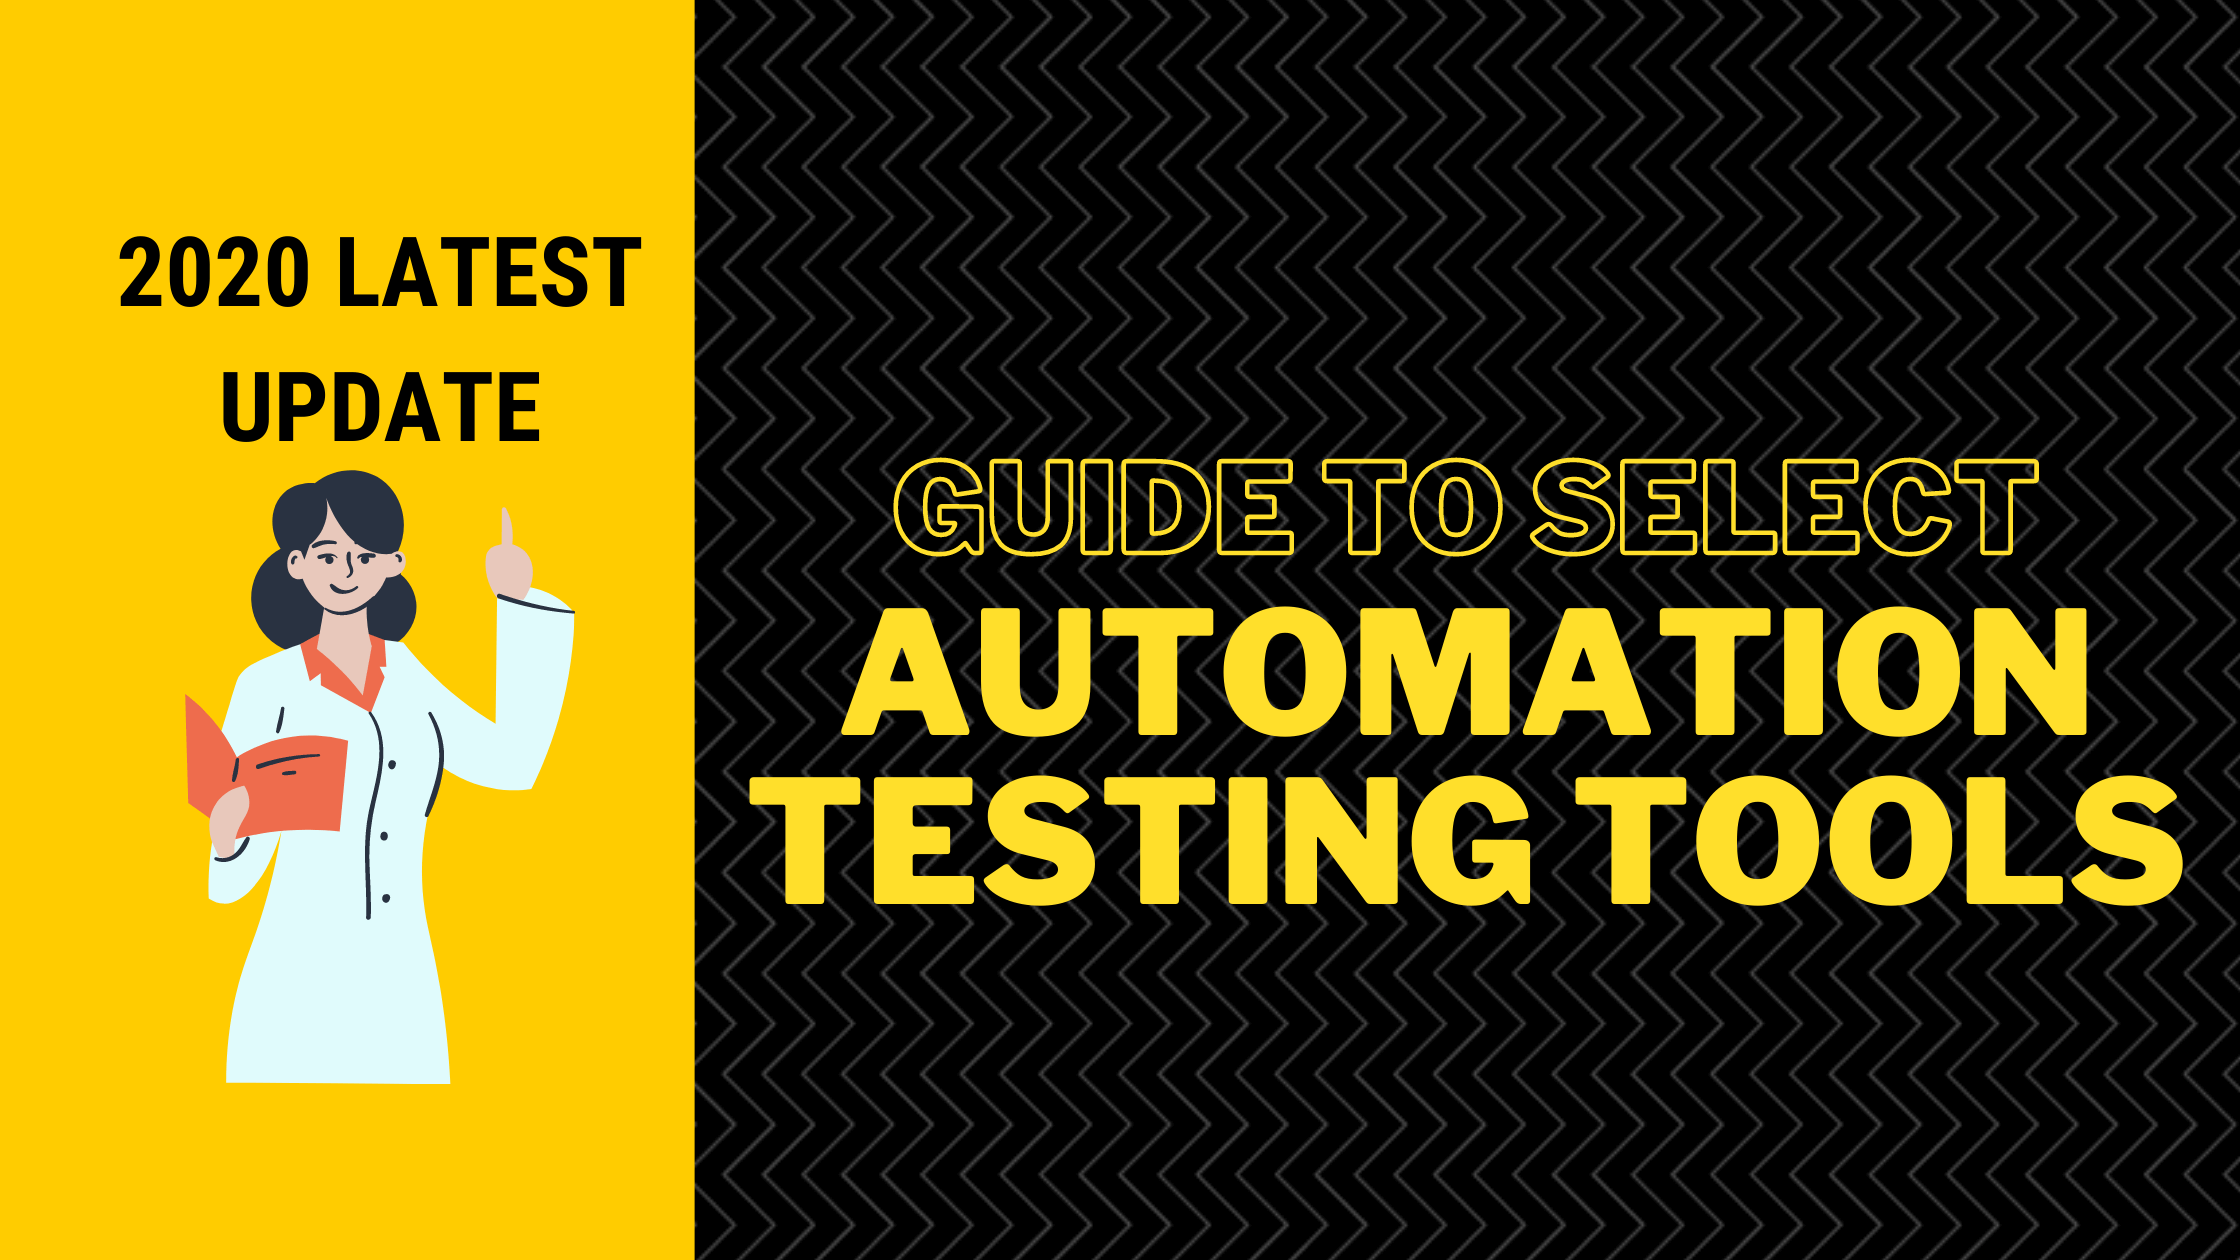 Guide To Select Automation Testing Tools